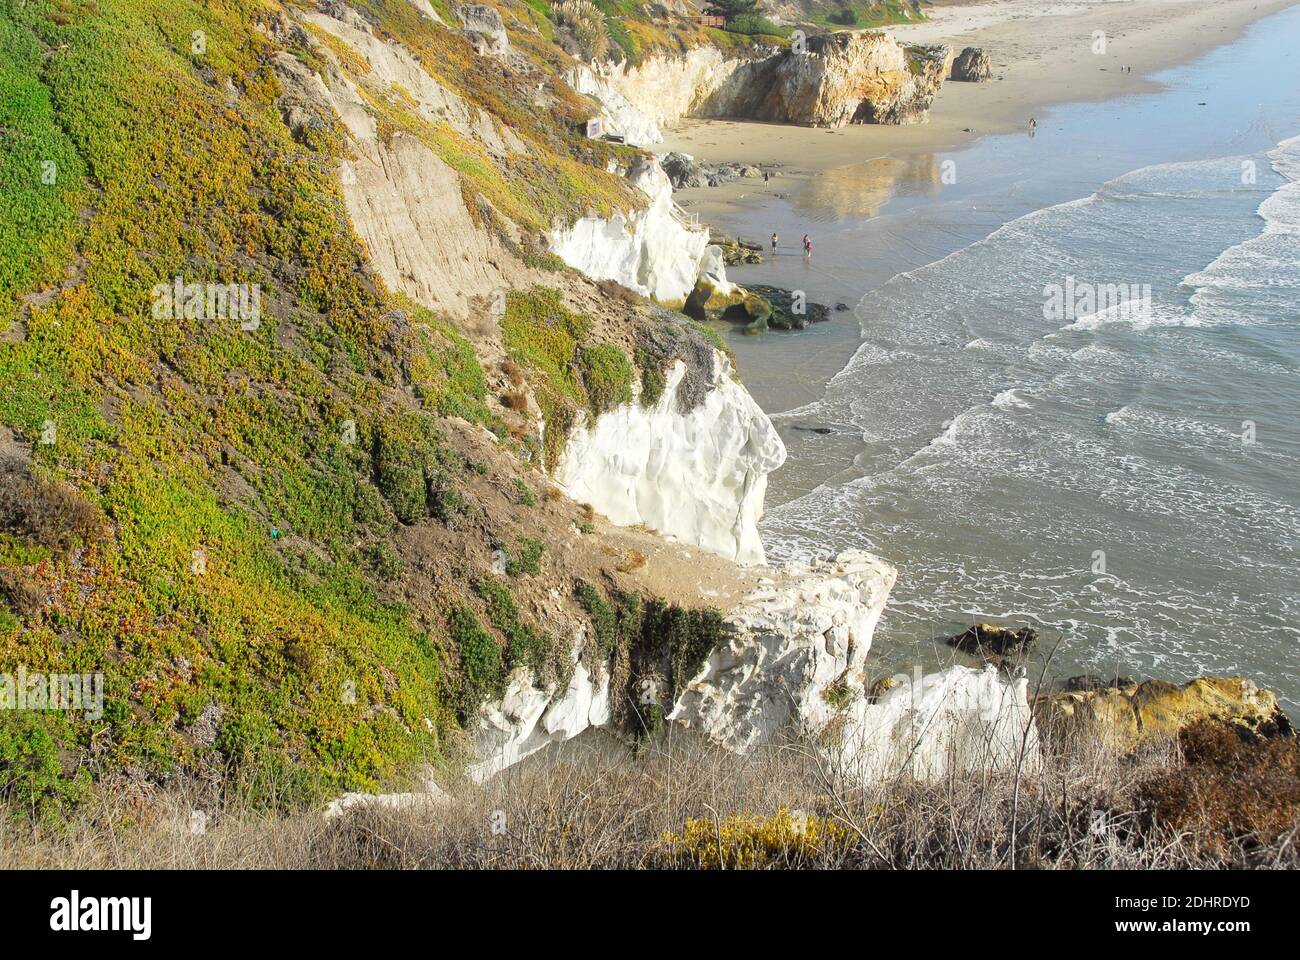 White cliffs on the beach in Pismo Beach in San Luis Obispo County, California, famous for its Pismo Clams, beaches, and sand dunes. Stock Photo